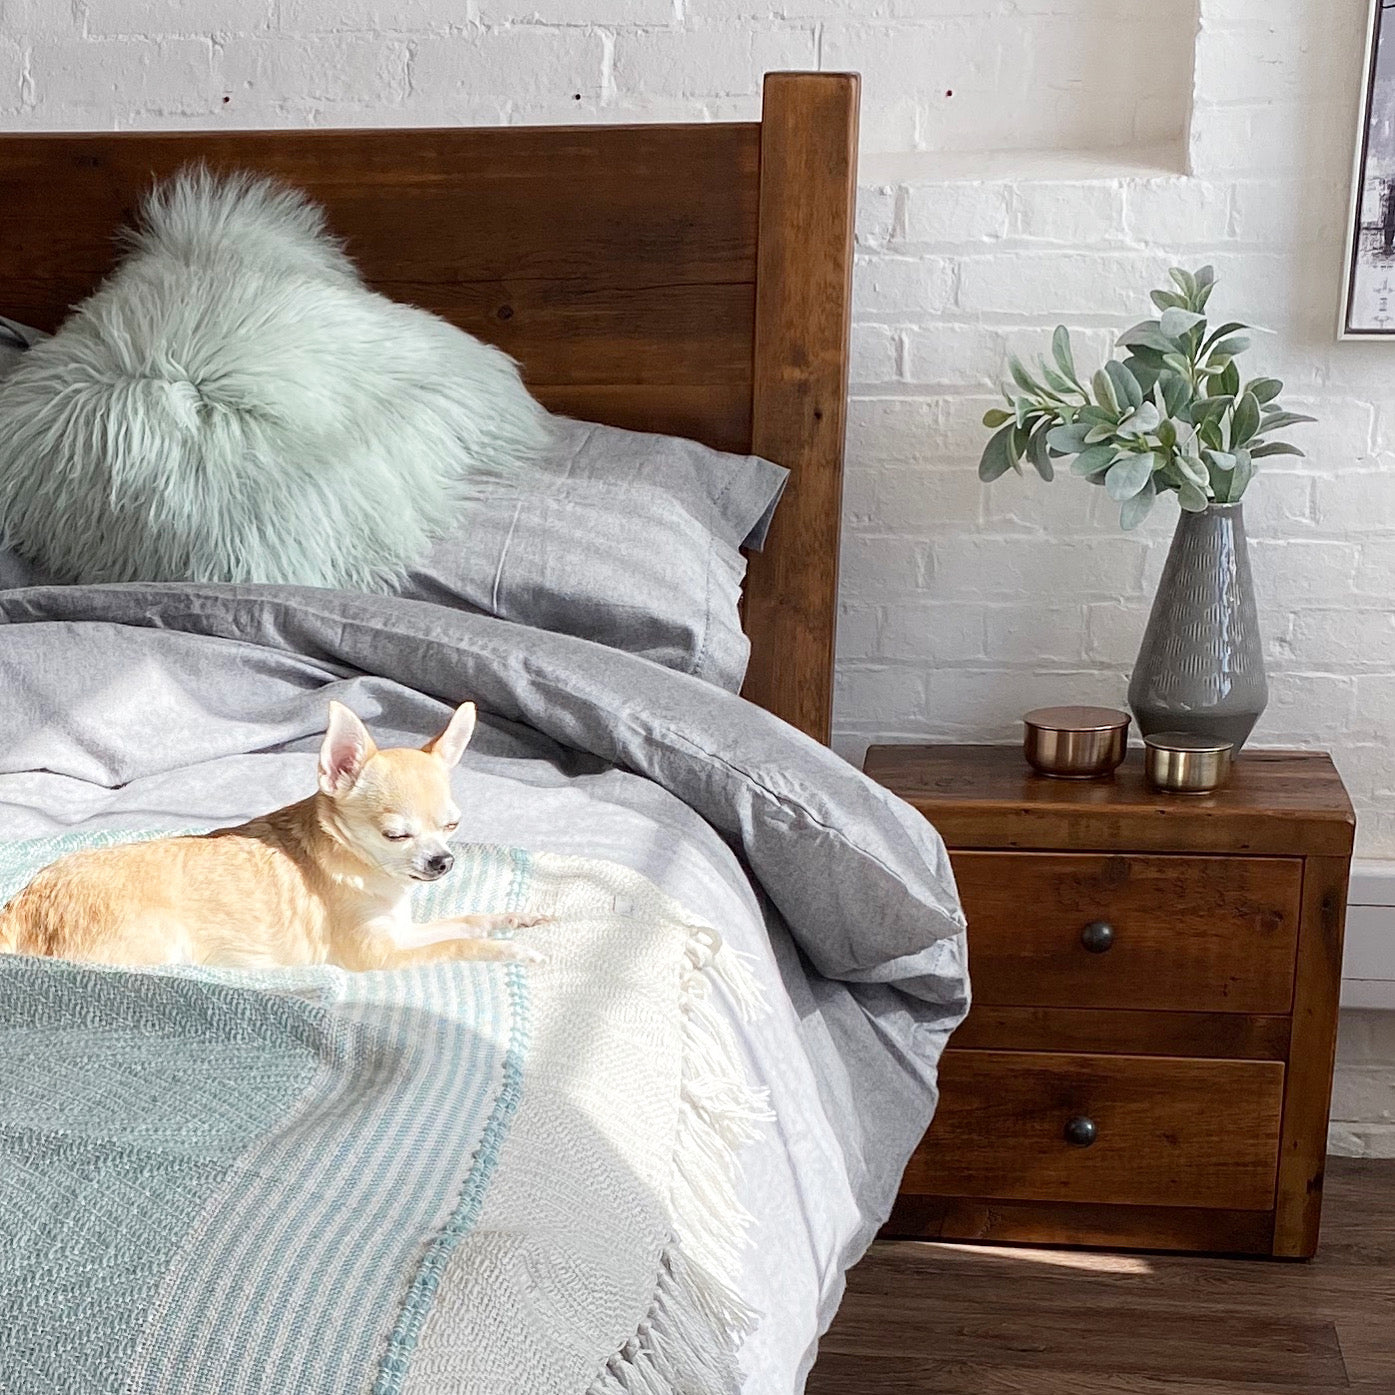 reclaimed solid wood bed frame with wooden bedside table and small dog on bed